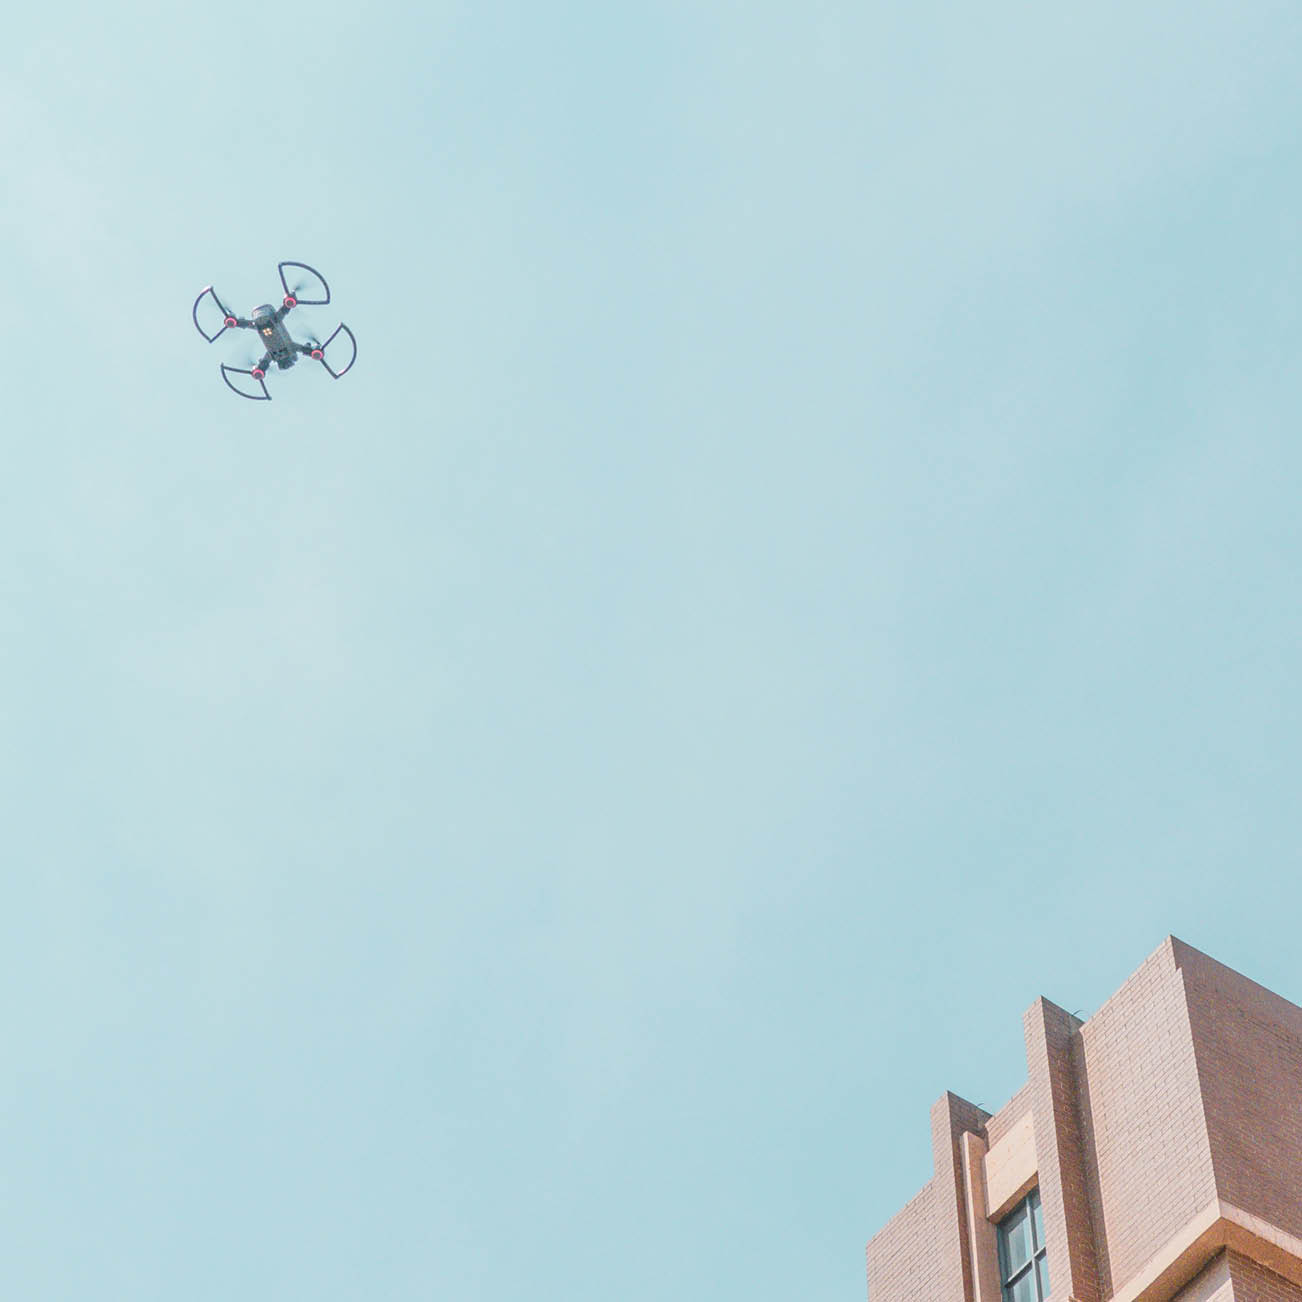 drone flying high in the sky above building